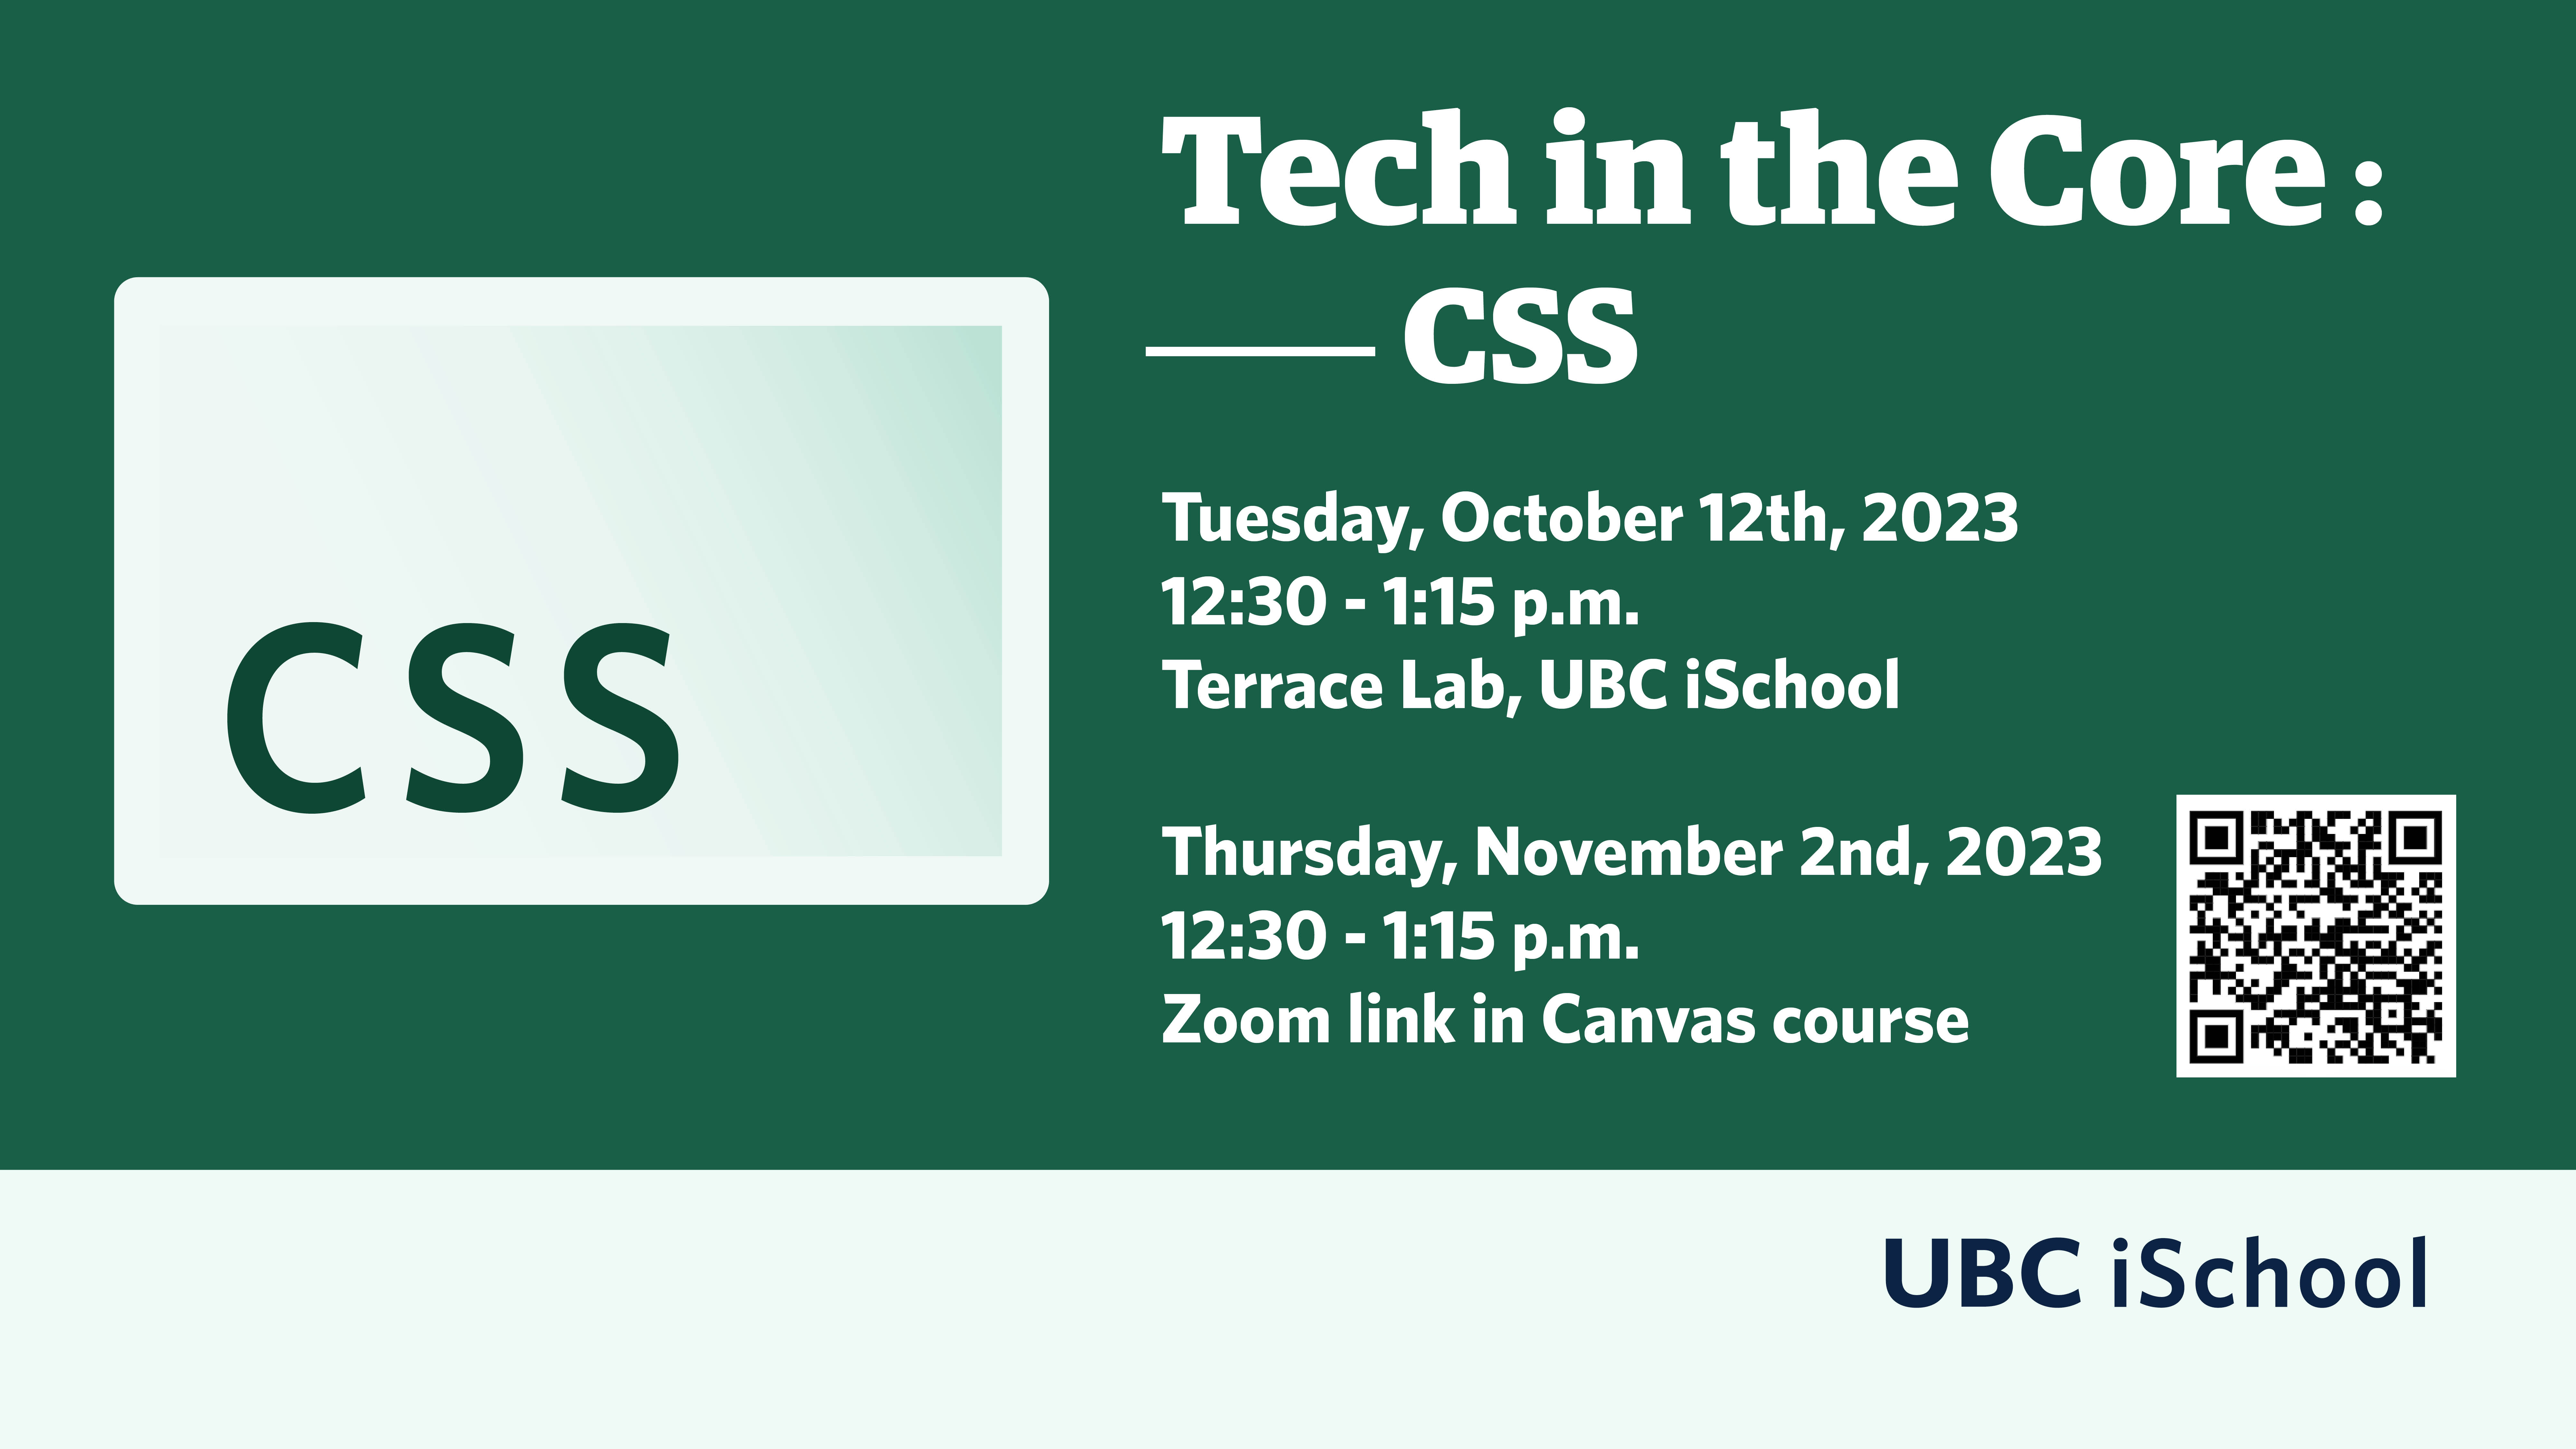 Poster advertising the CSS workshop.